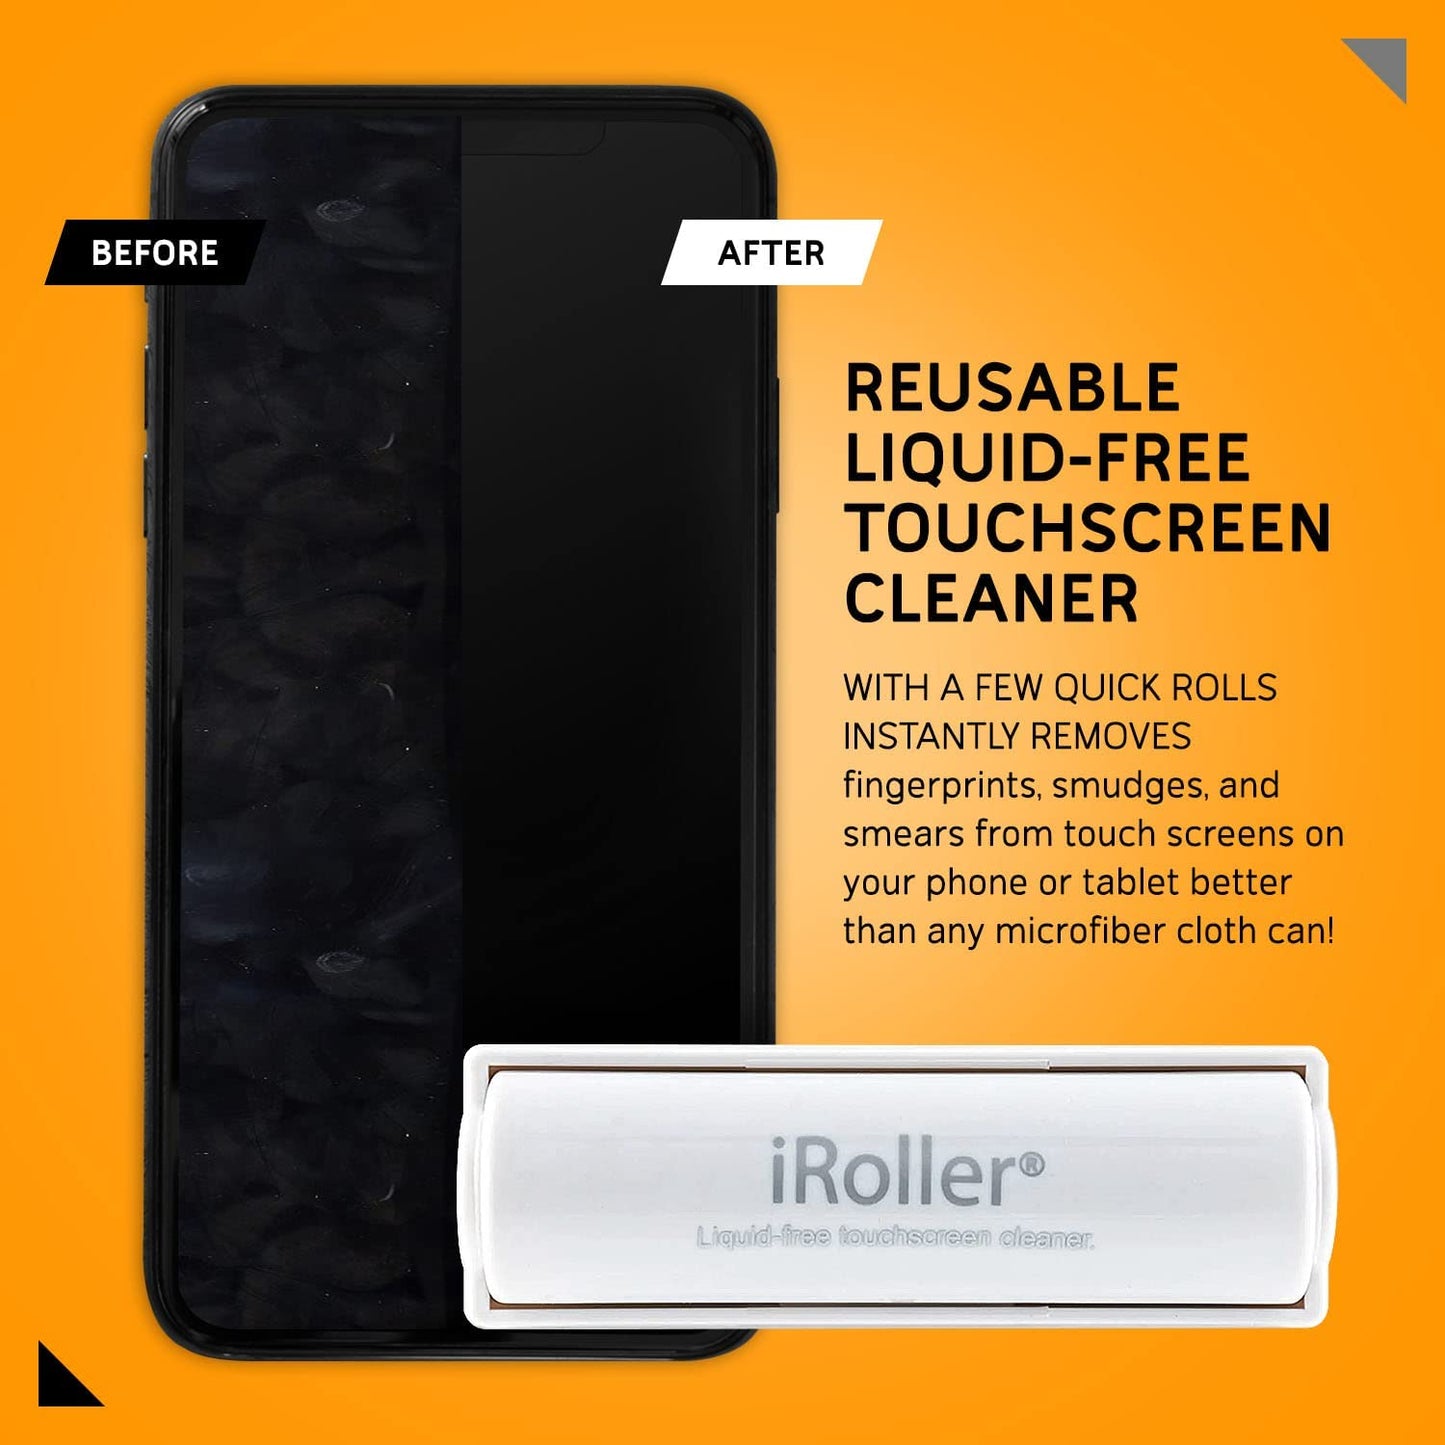 An iroller screen cleaner and a before and after image of a cellphone showing the difference between clean and dirty after using the iroller.